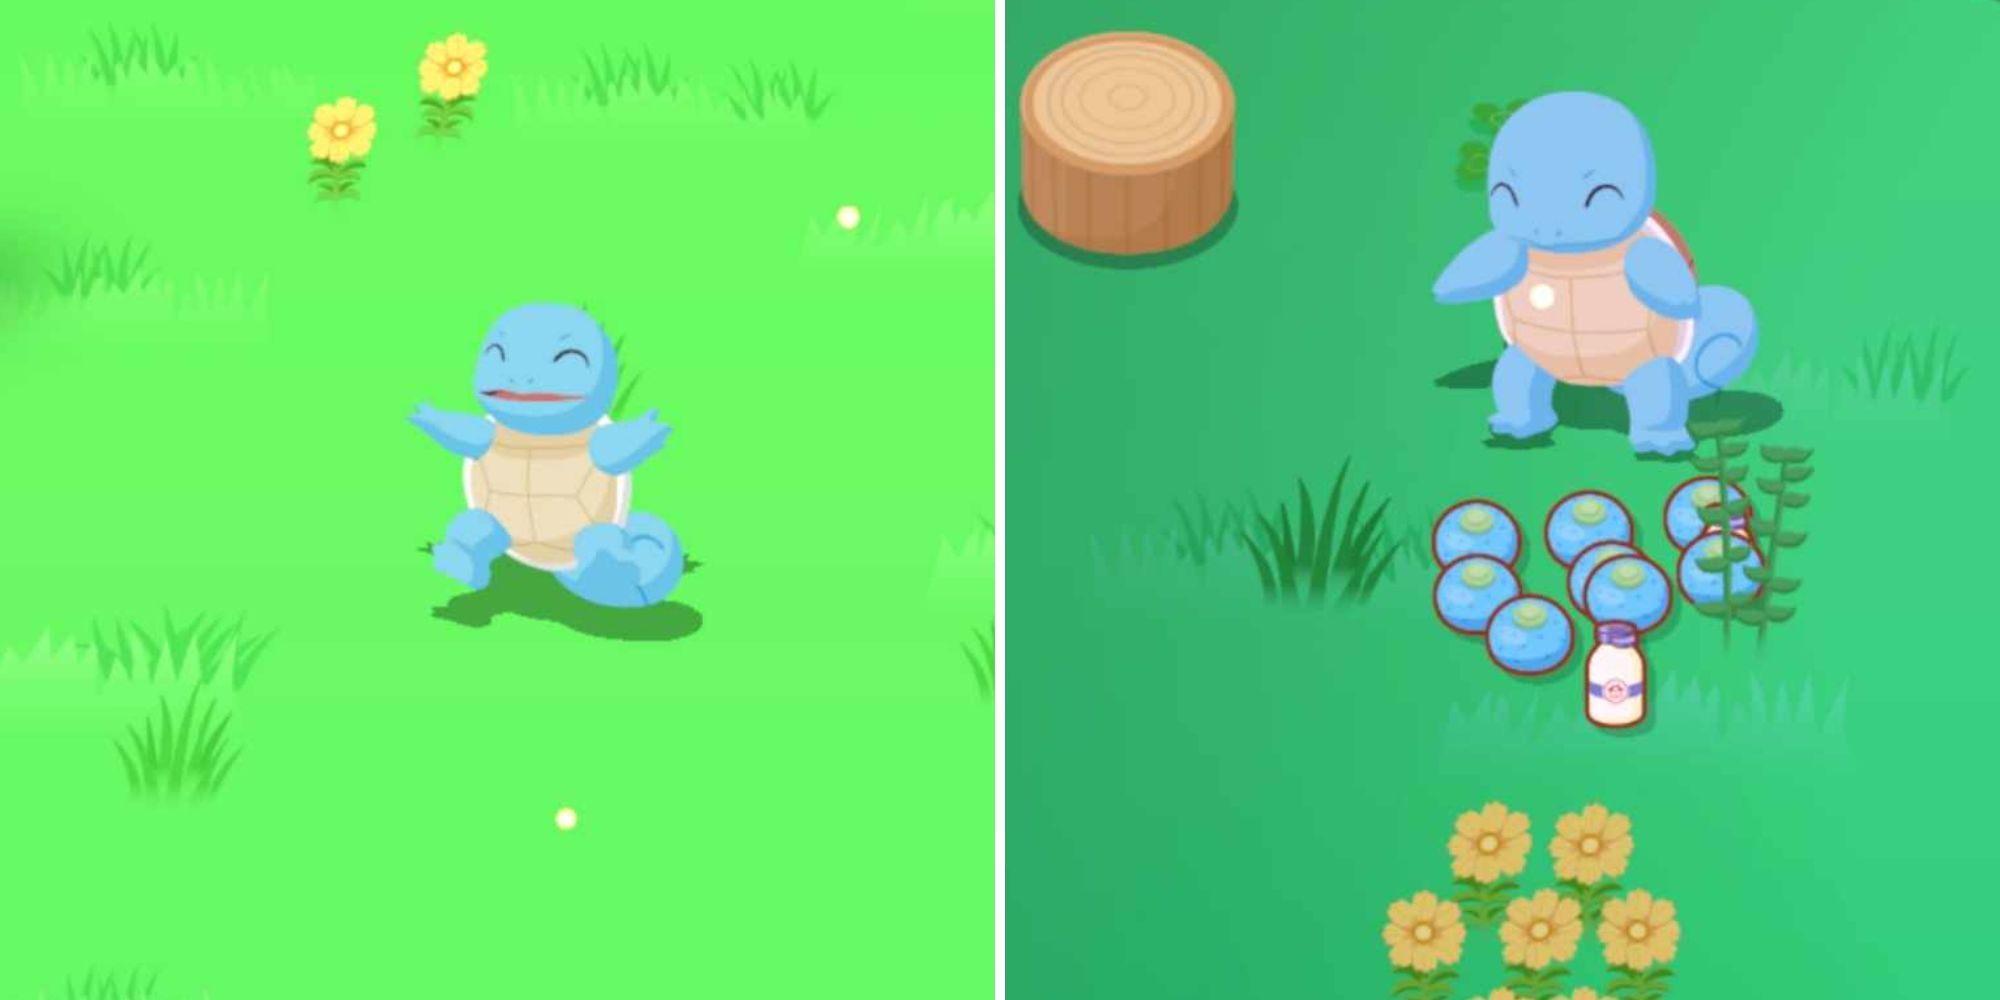 The Pokemon Sleep character is showing off their happy squirtle. 